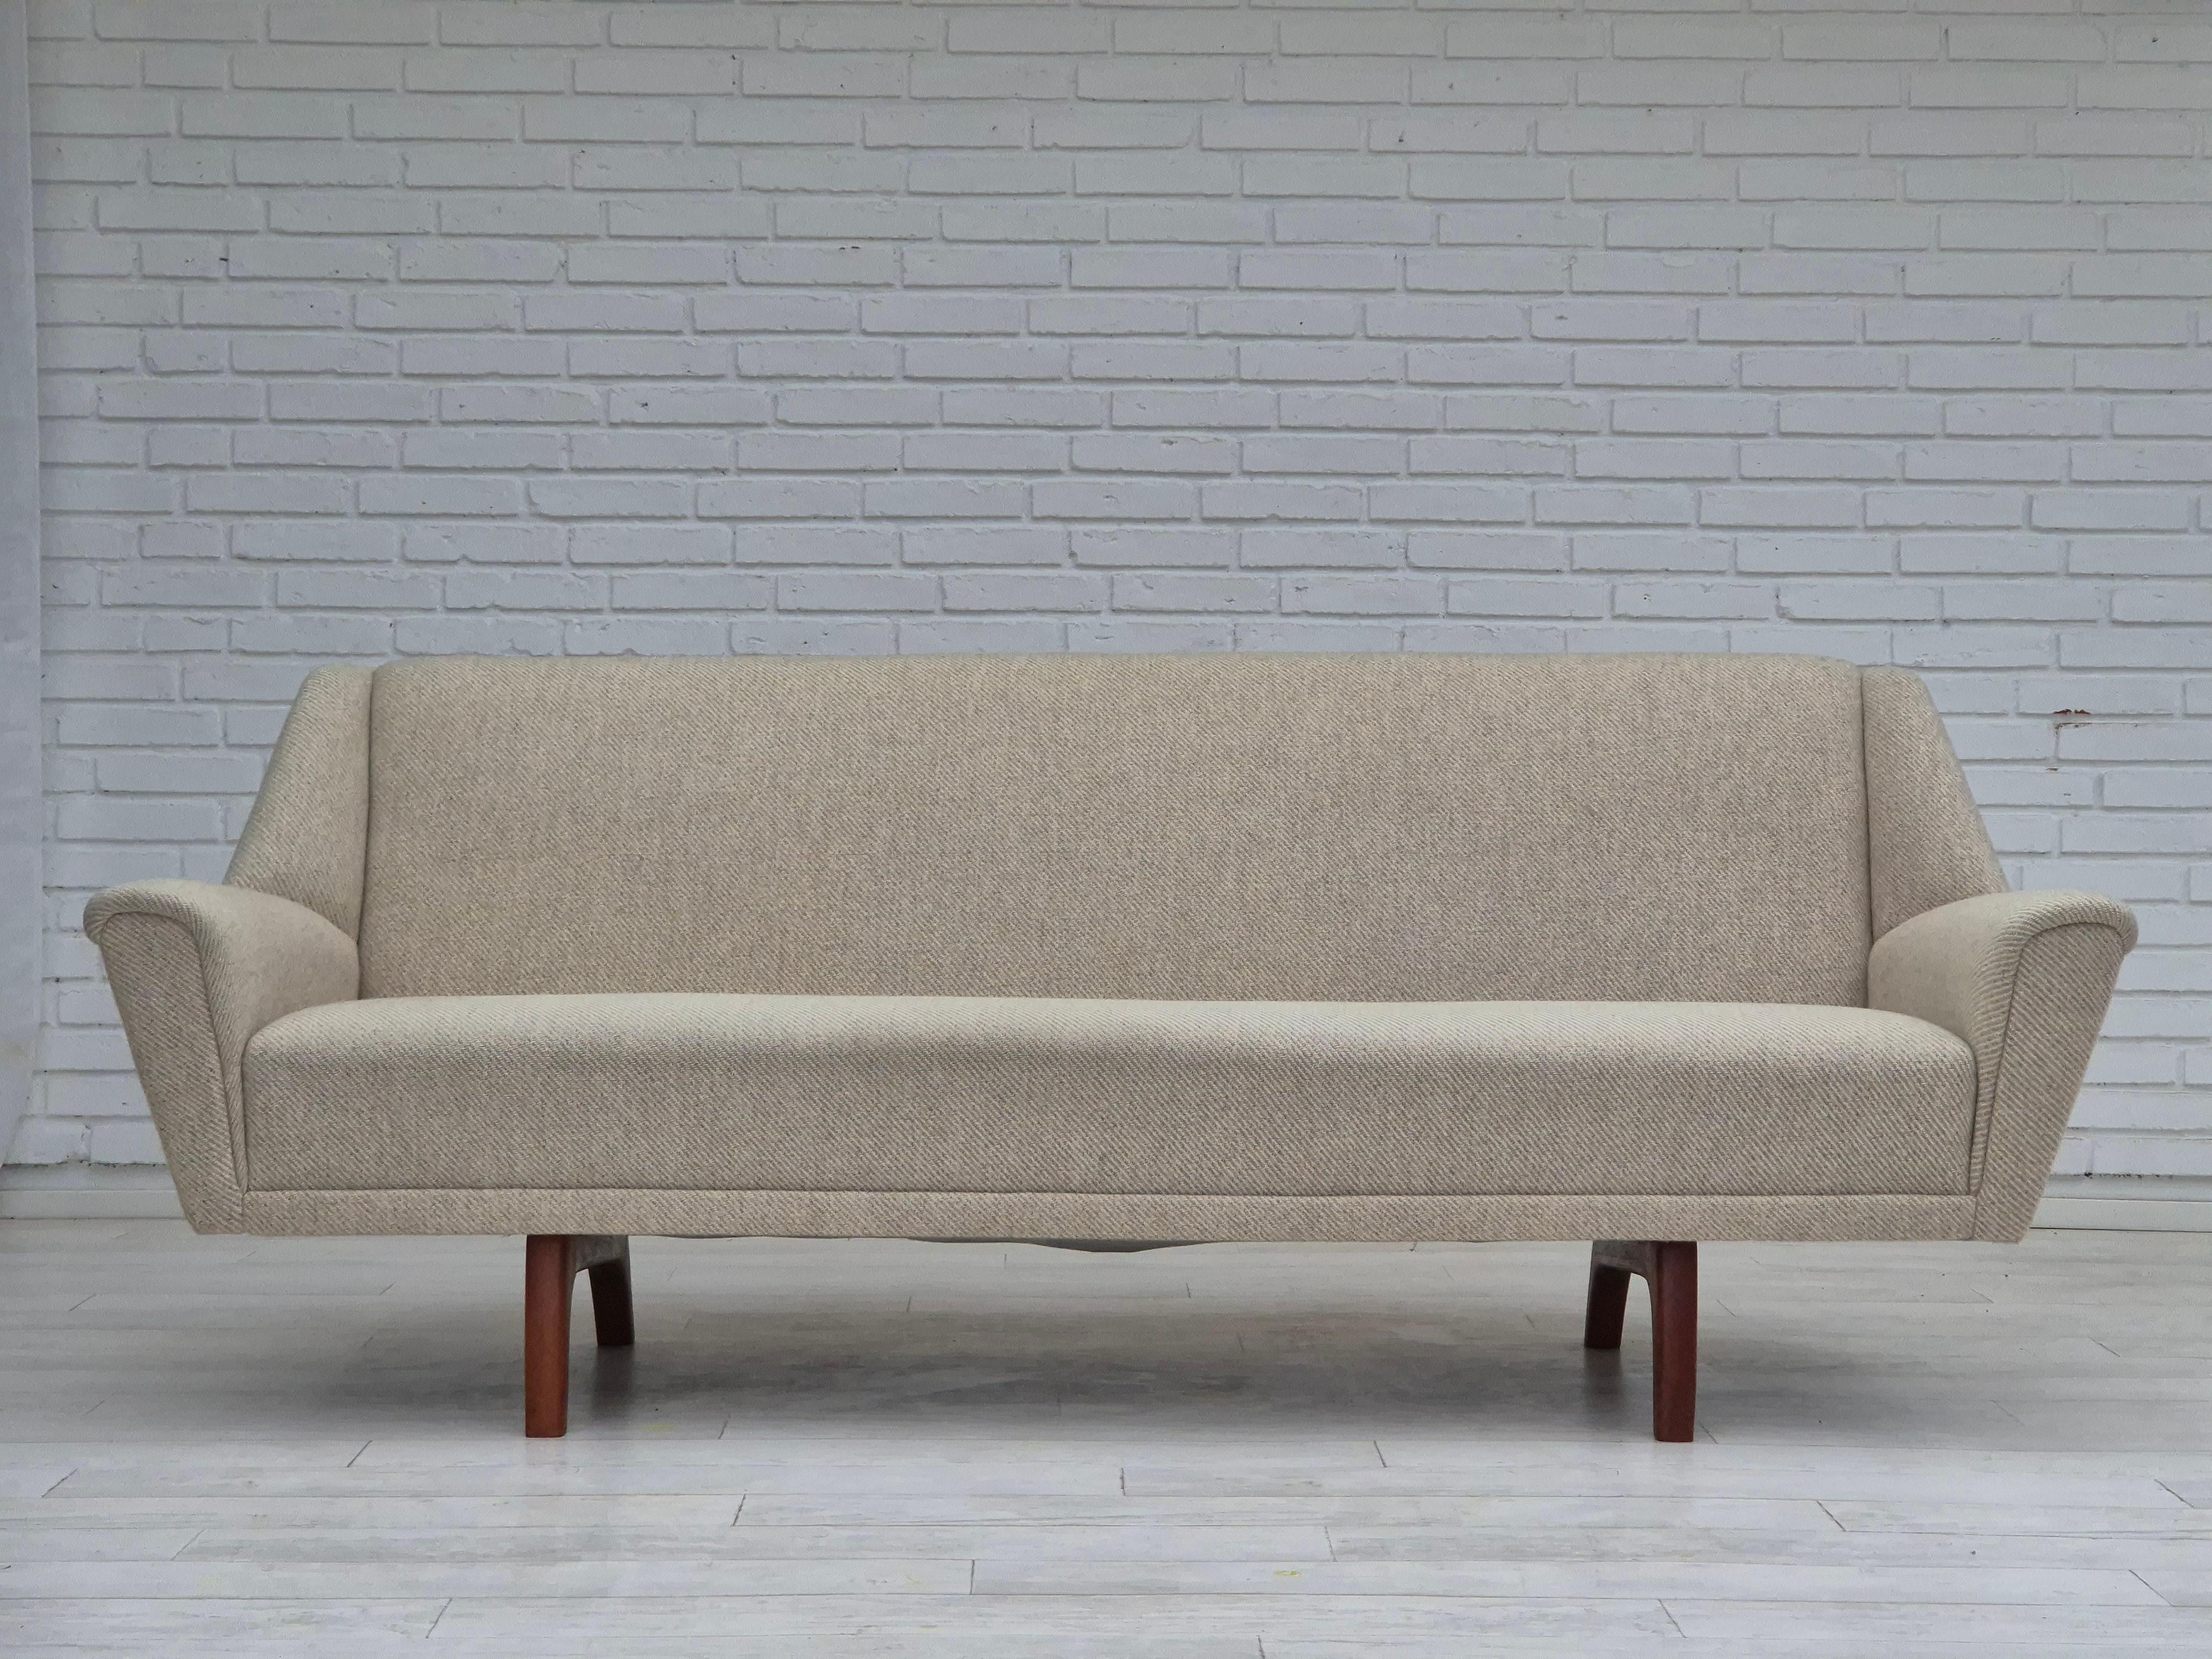 1970s, Danish 3 seater sofa in original very good condition: no smells and no stains. Furniture wool fabric, teak wood legs. Manufactured by Danish furniture manufacturer in about 1970s.